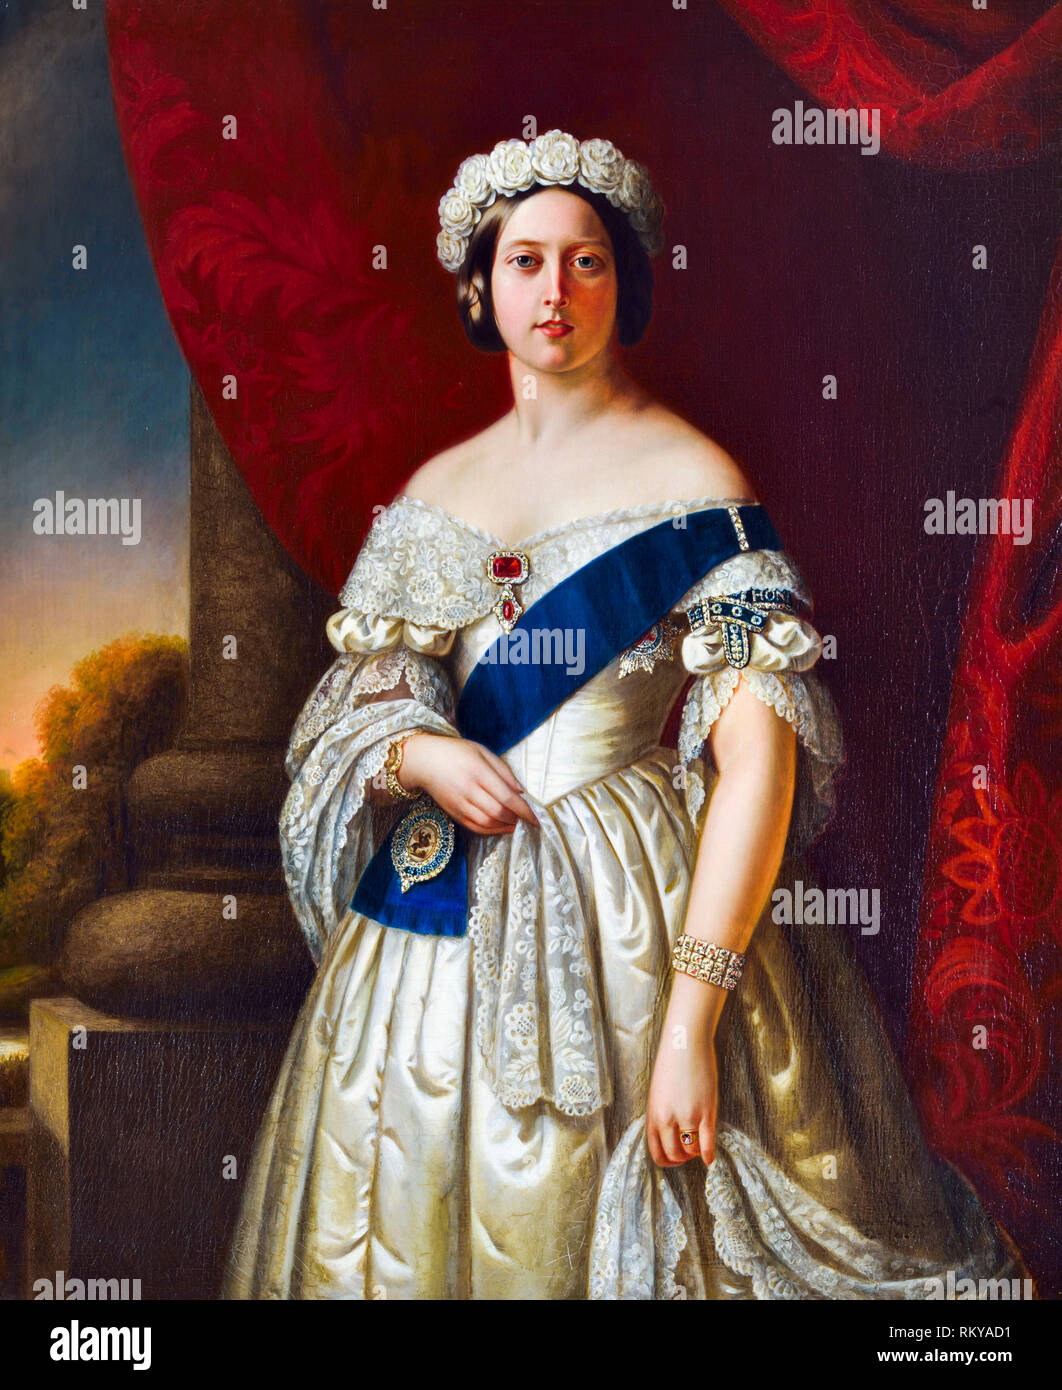 Queen Victoria of England, portrait painting by Alexander Melville, 1845 Stock Photo